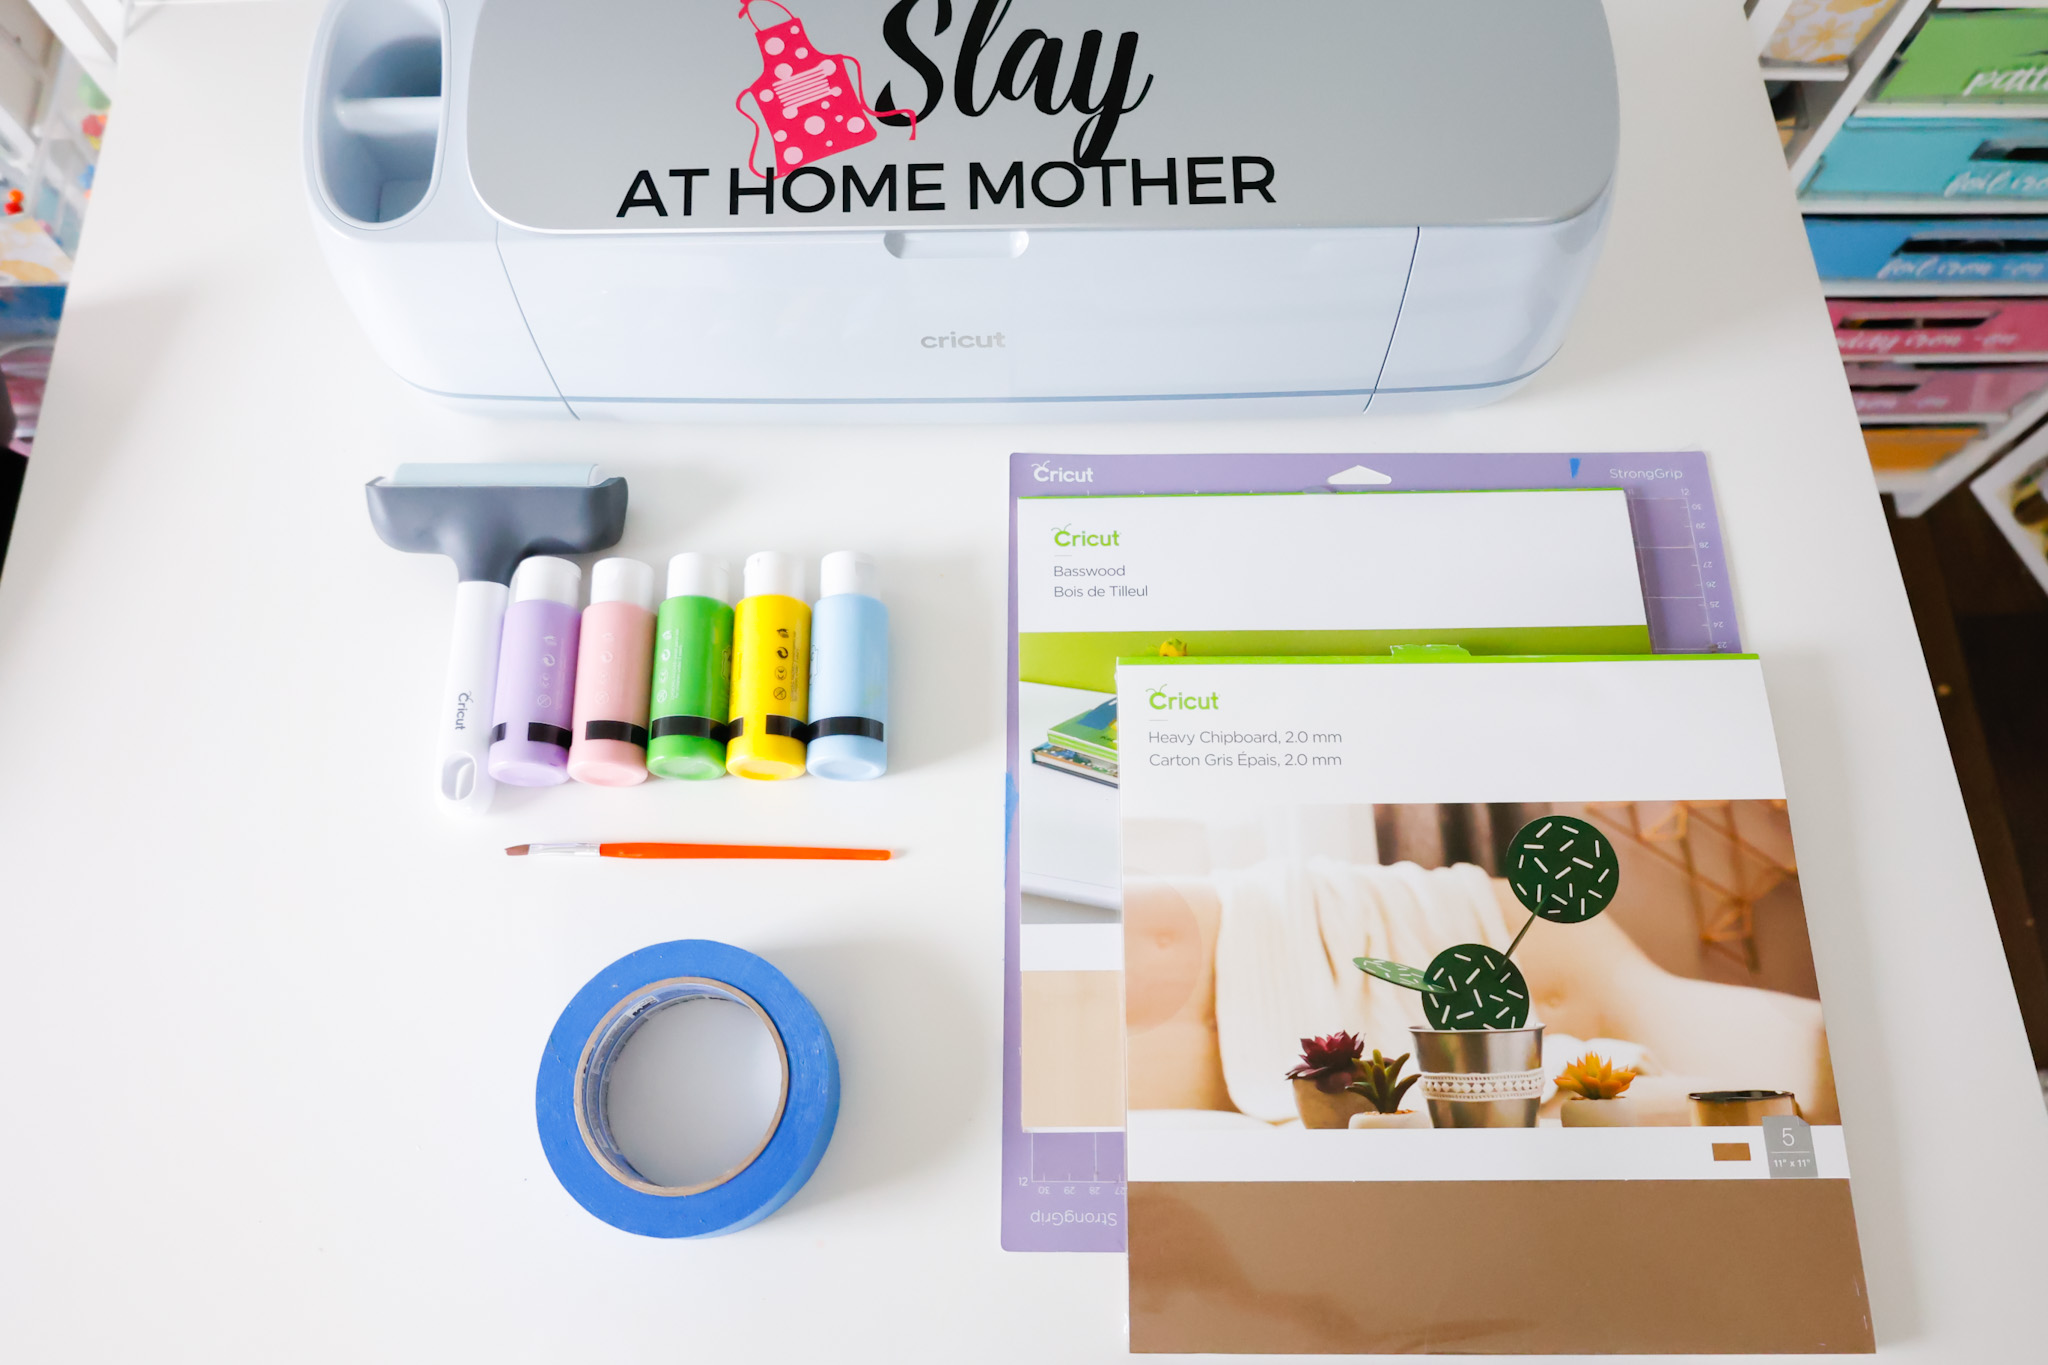 Dupray Neat Steam Cleaner - My Honest Review - Slay At Home Mother